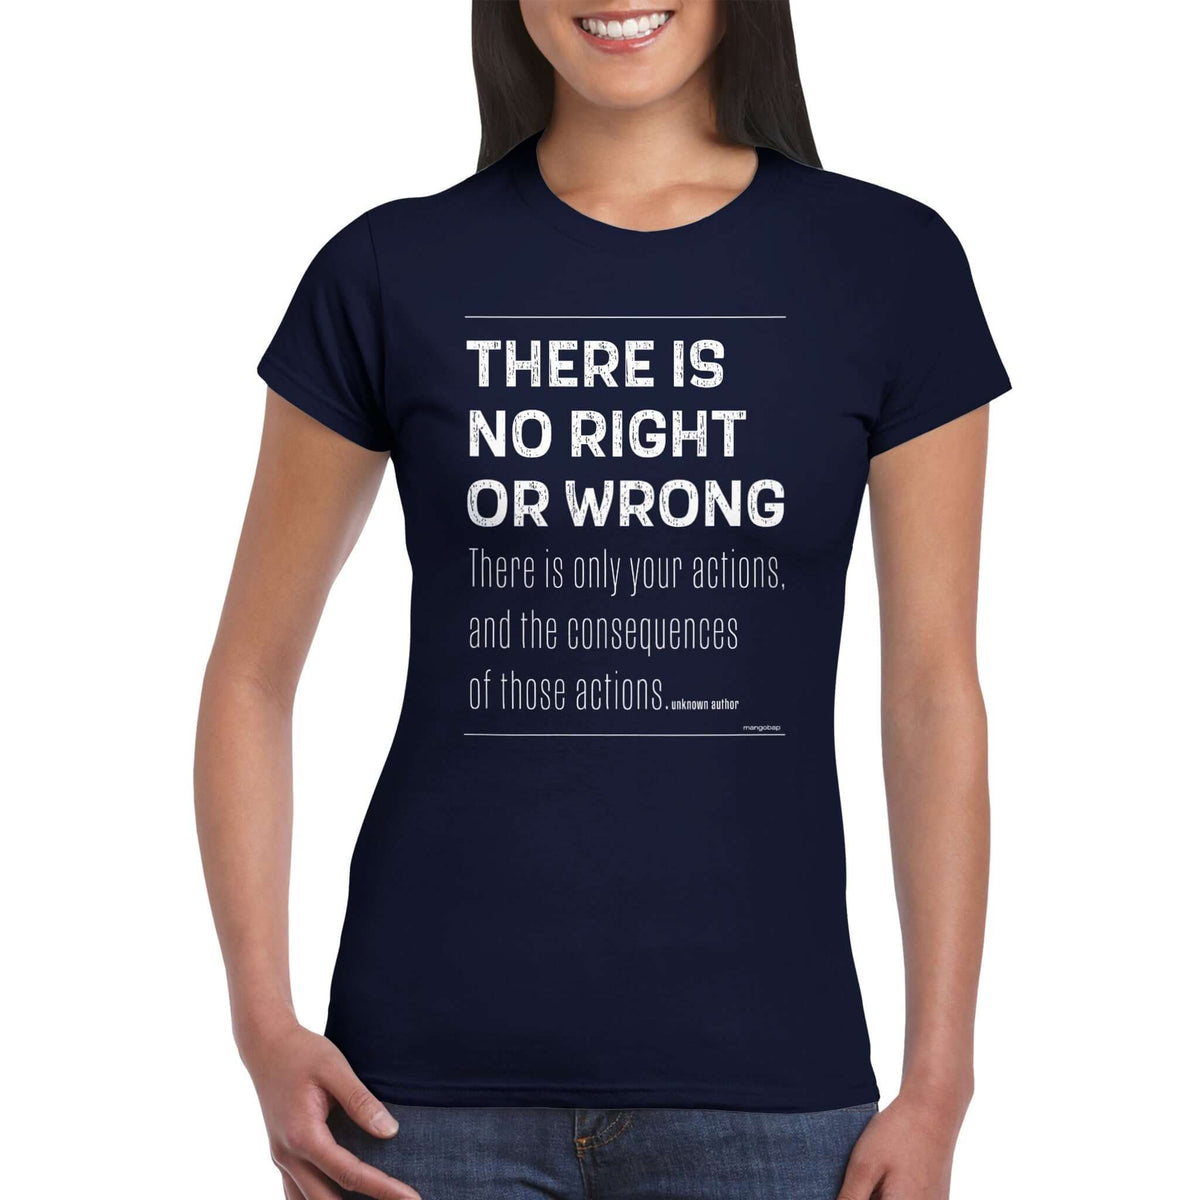 Womens There Is No Right Or Wrong navy t shirt - Mangobap